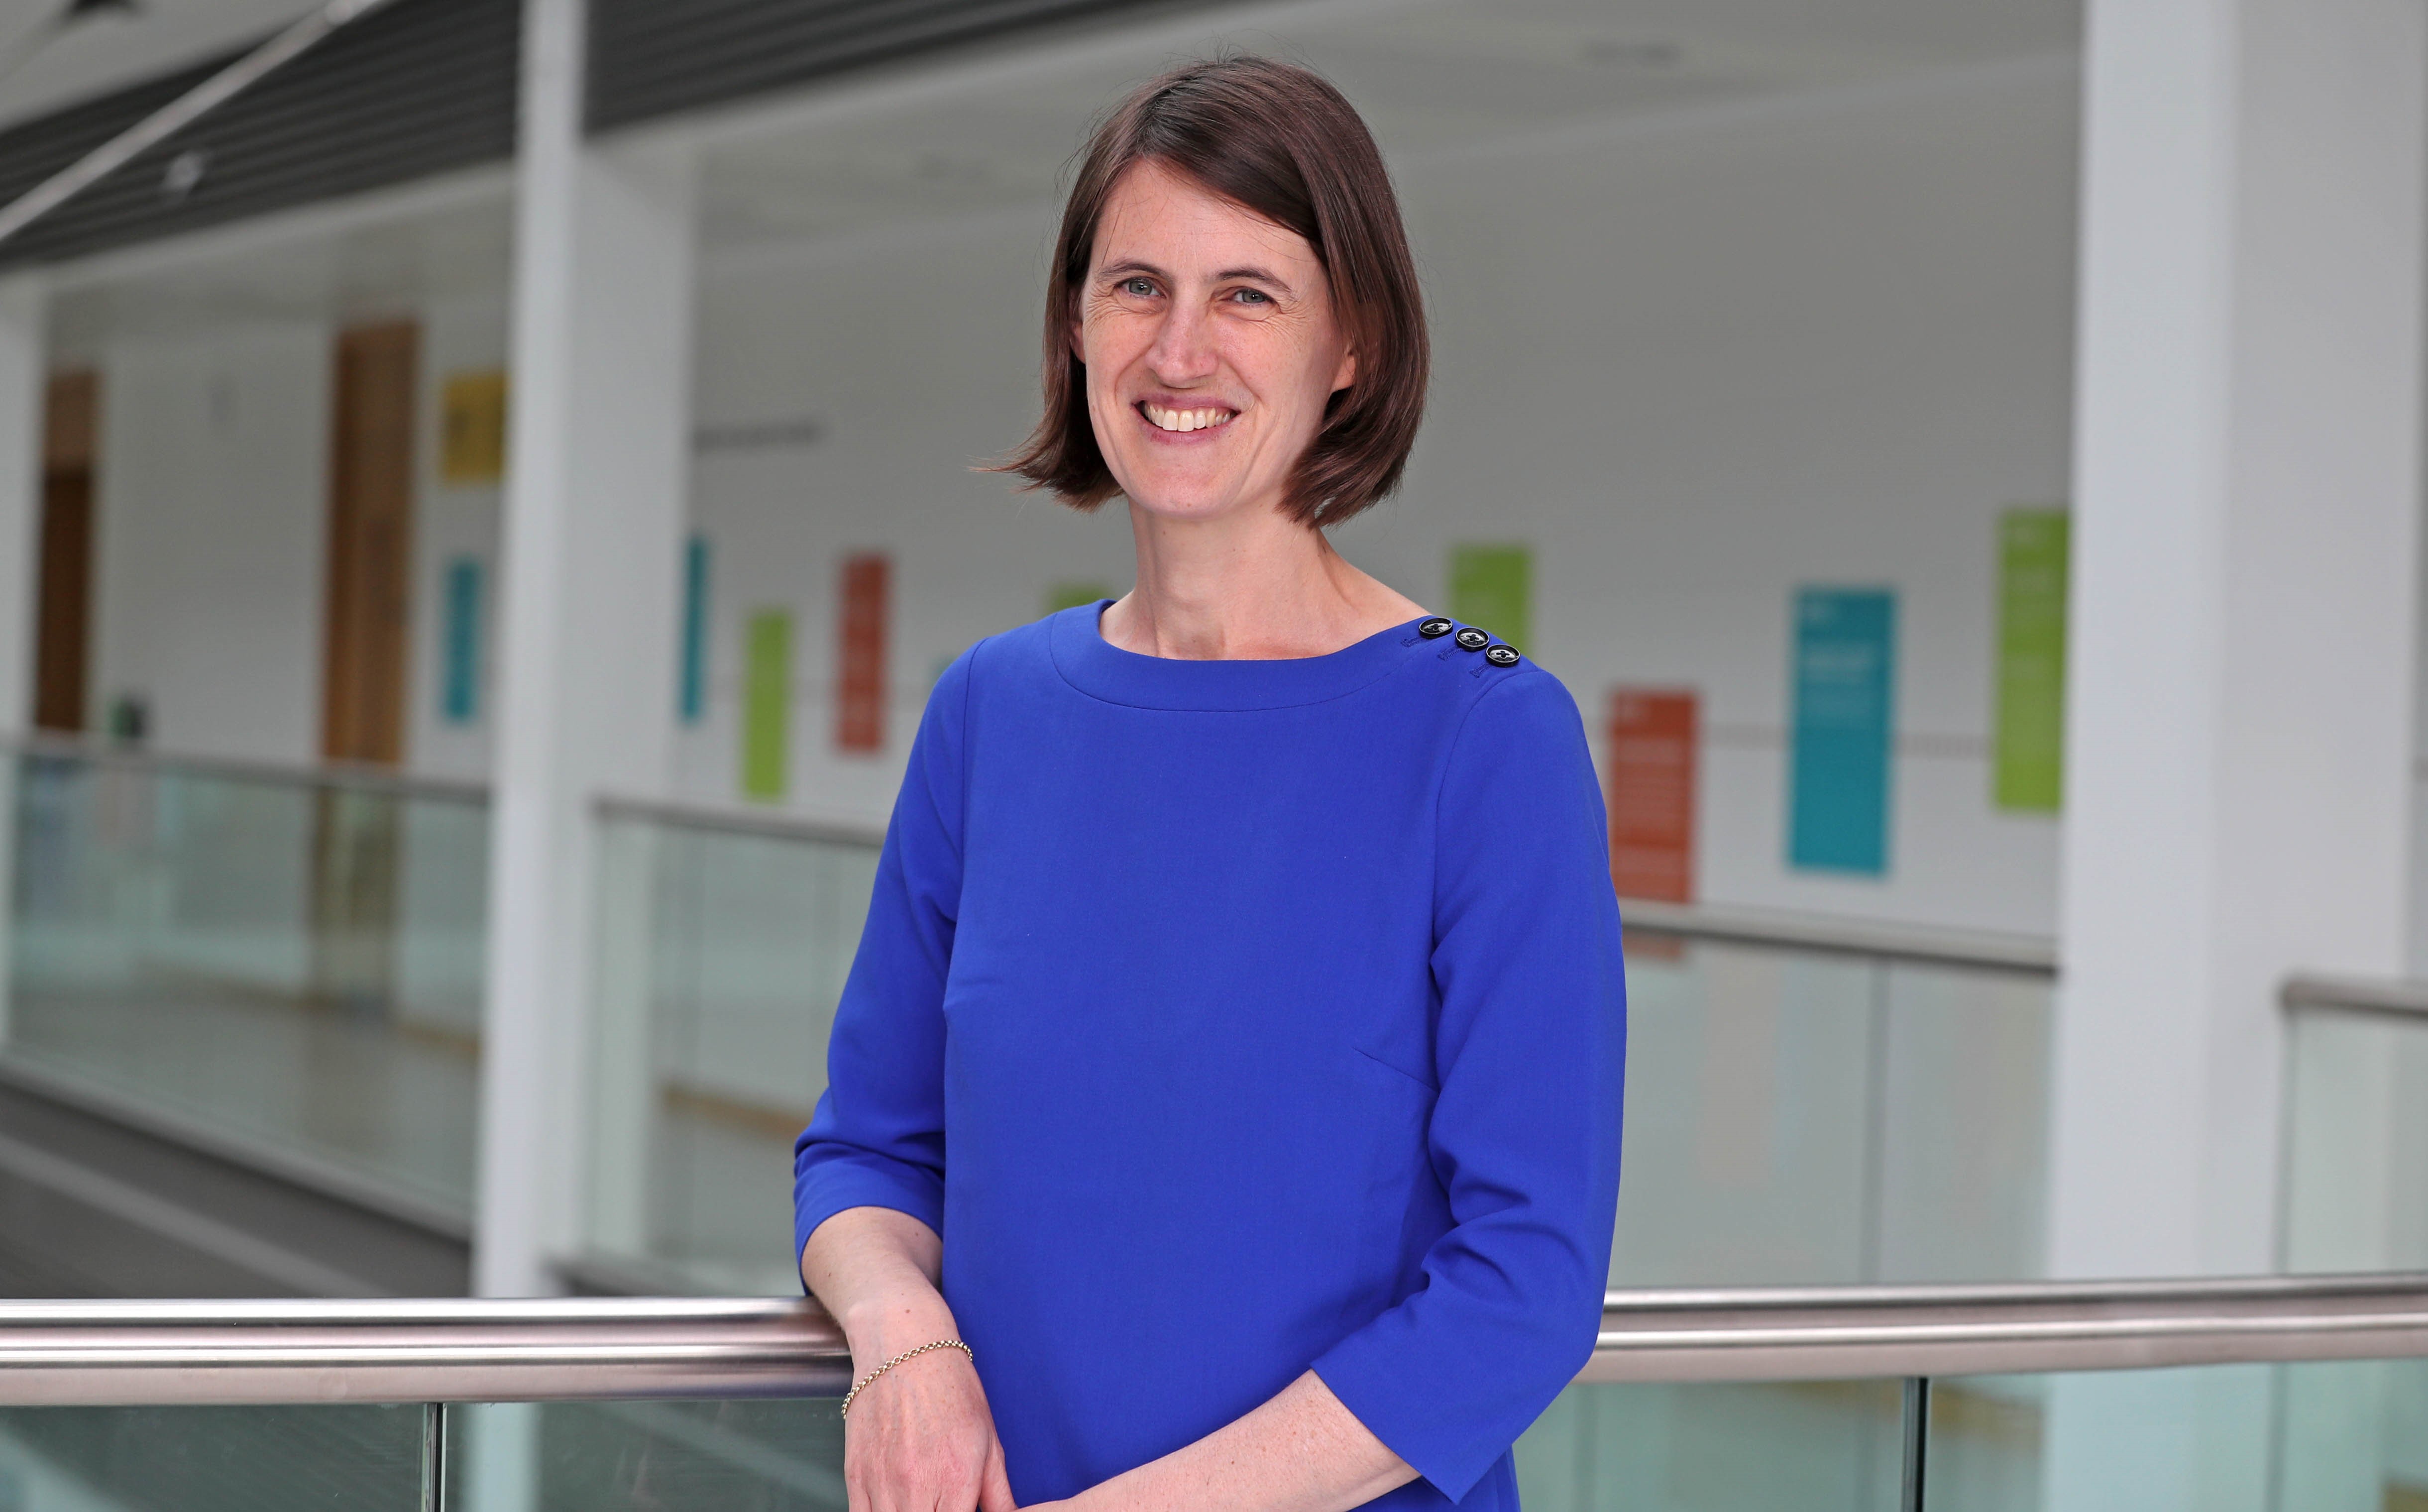 Lead author Professor Roisin Connolly, Director of Cancer Research @UCC